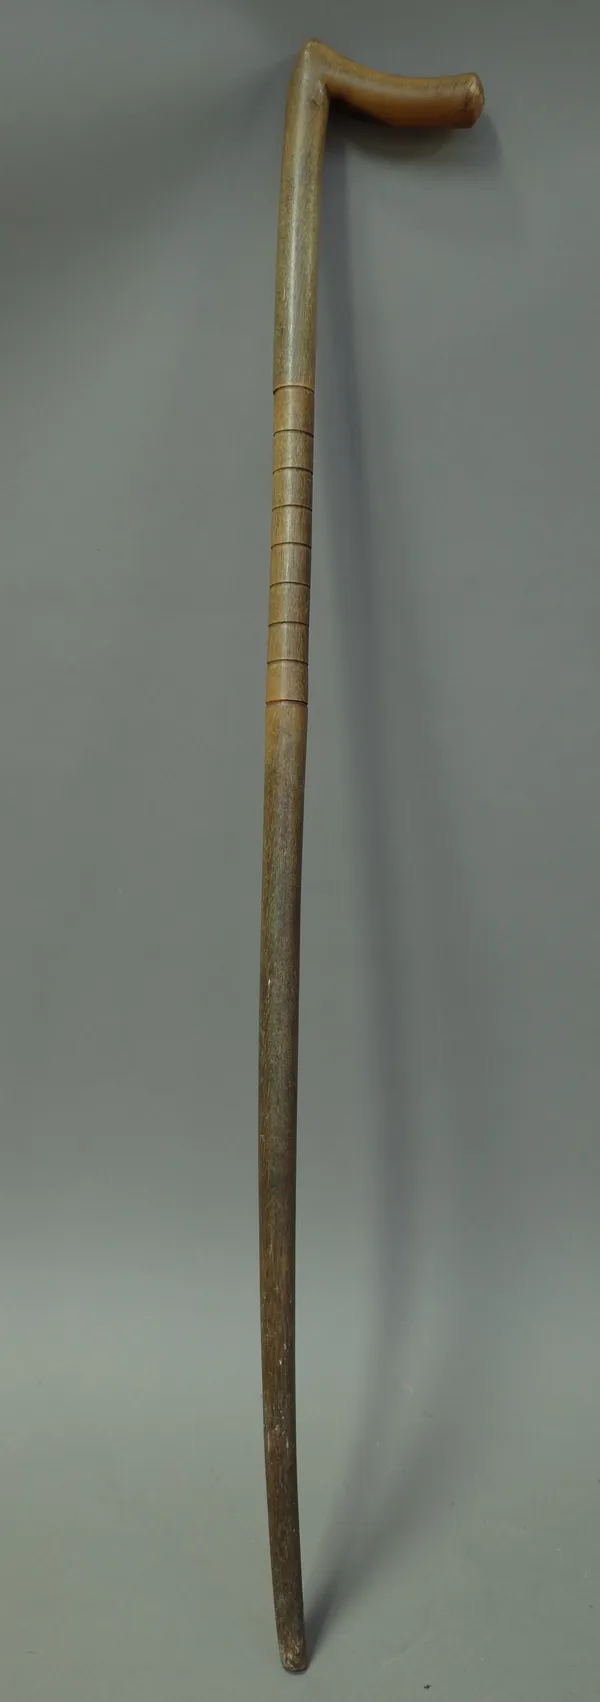 A rhinoceros horn walking stick, late 19th century, of sectional form with carved bands to the shaft. 84cm.